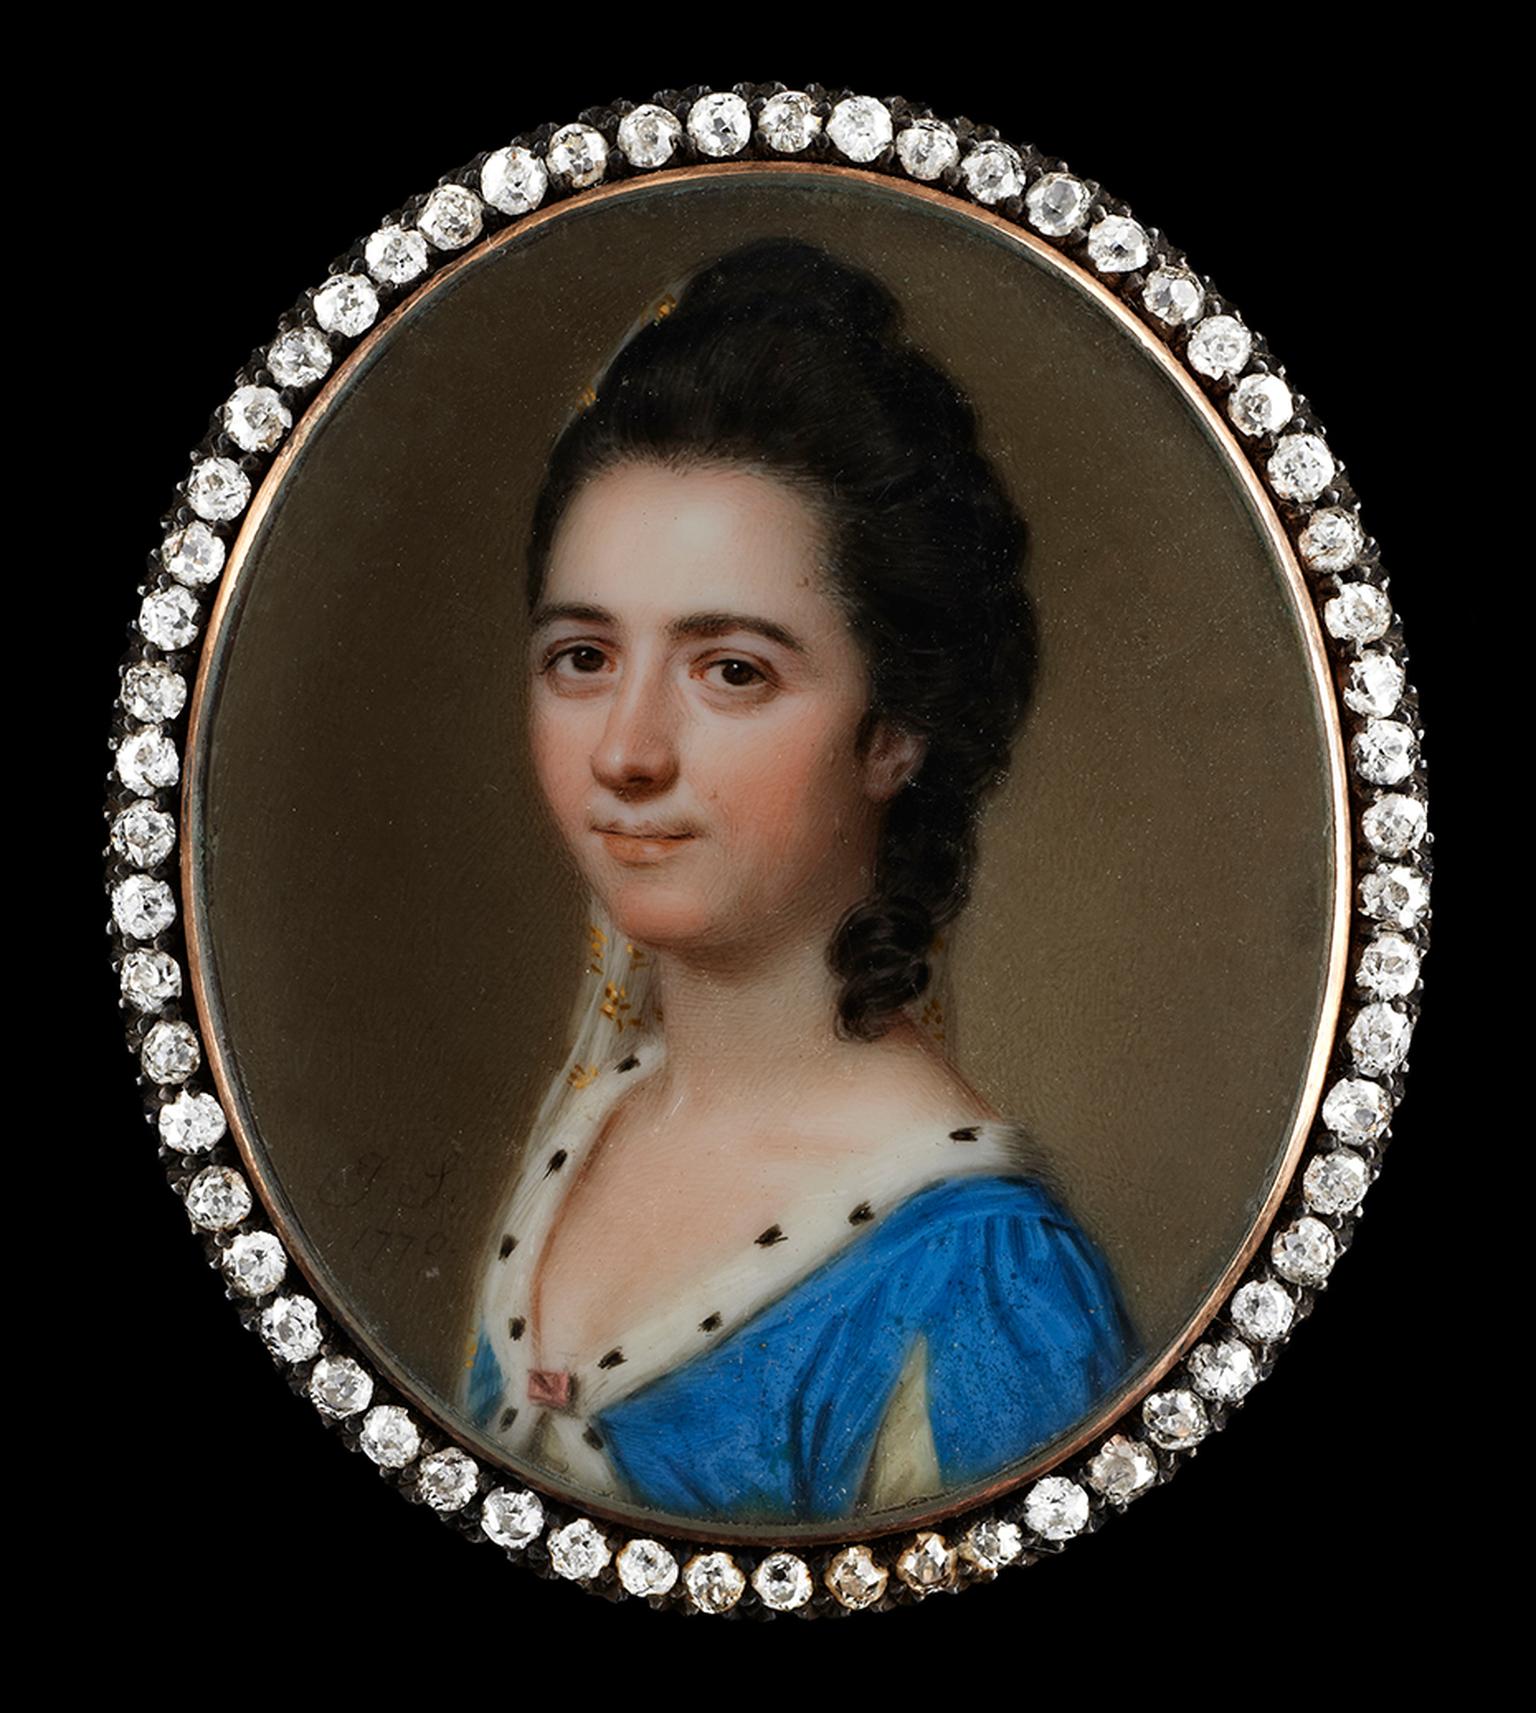 John Smart portrait miniature surrounded by diamonds with a lady identified as "Miss Byron" wearing an ermine-trimmed blue dress. Image by: Philip Mould & Company.